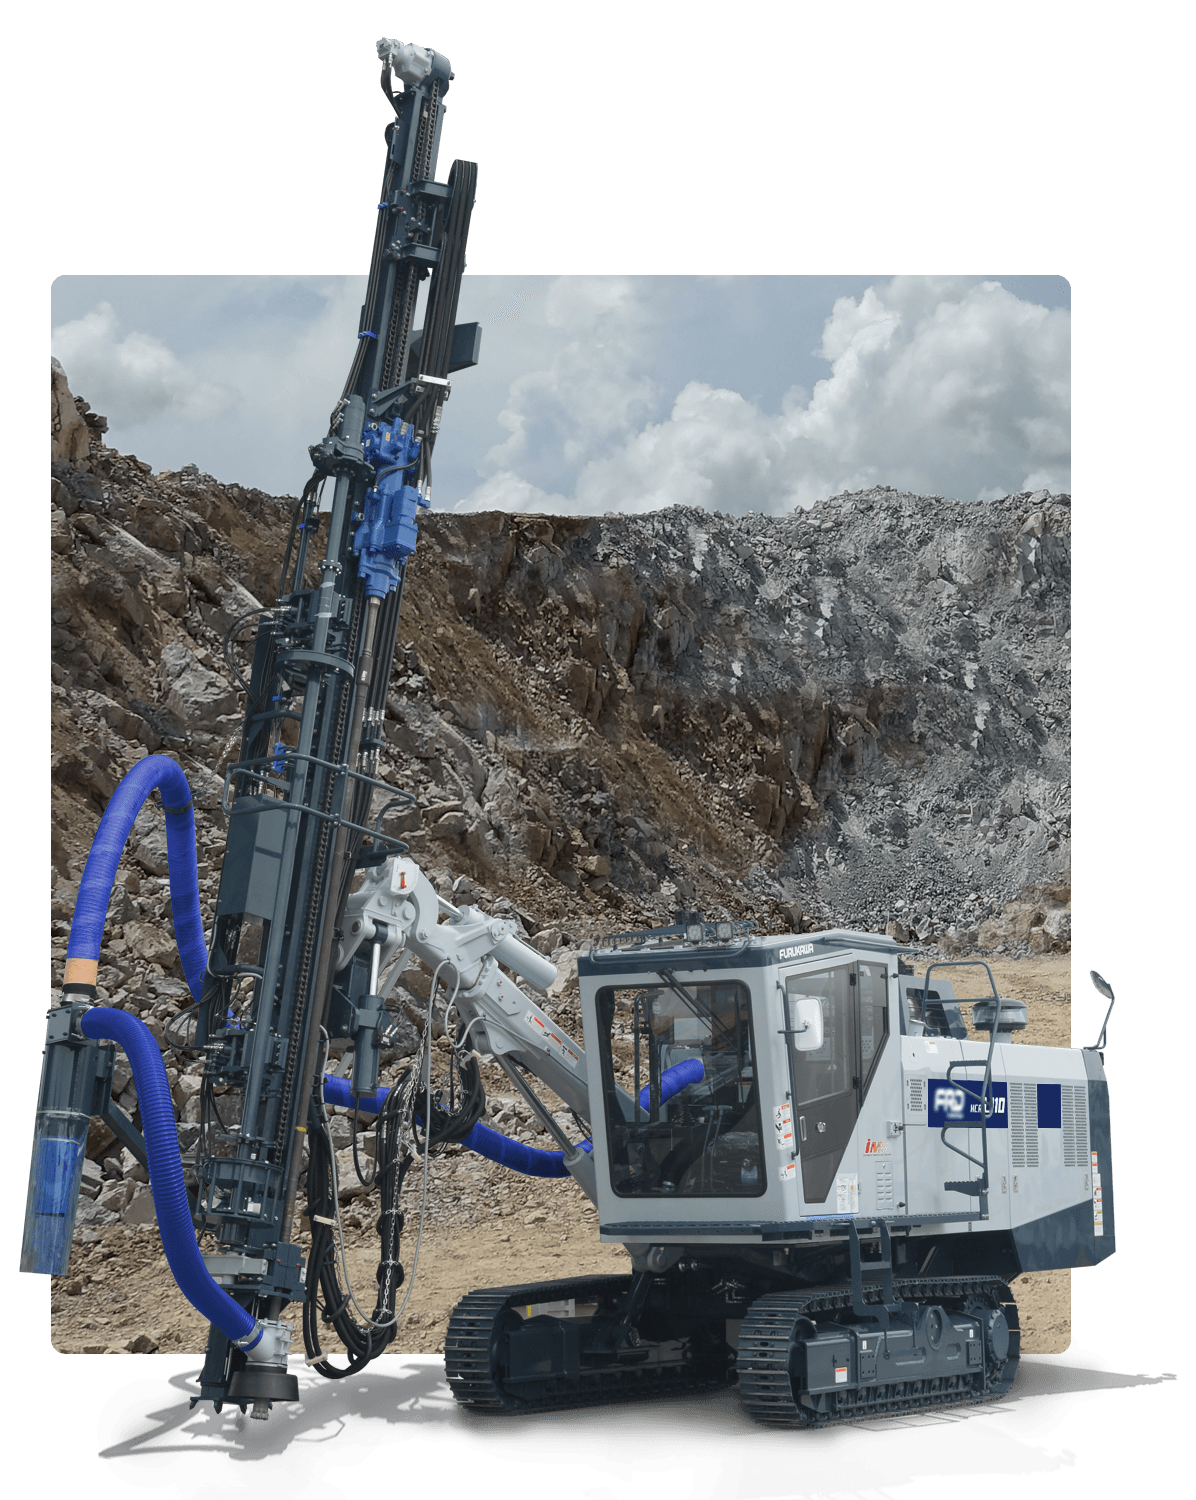 Furukawa Rock Drills provide the ultimate combination of performance and economy. Built tough, our top-hammer, Down the Hole (DTH) and pneumatic drills are equipped with features that maximize efficiency to assure high-performance at a low operating cost.